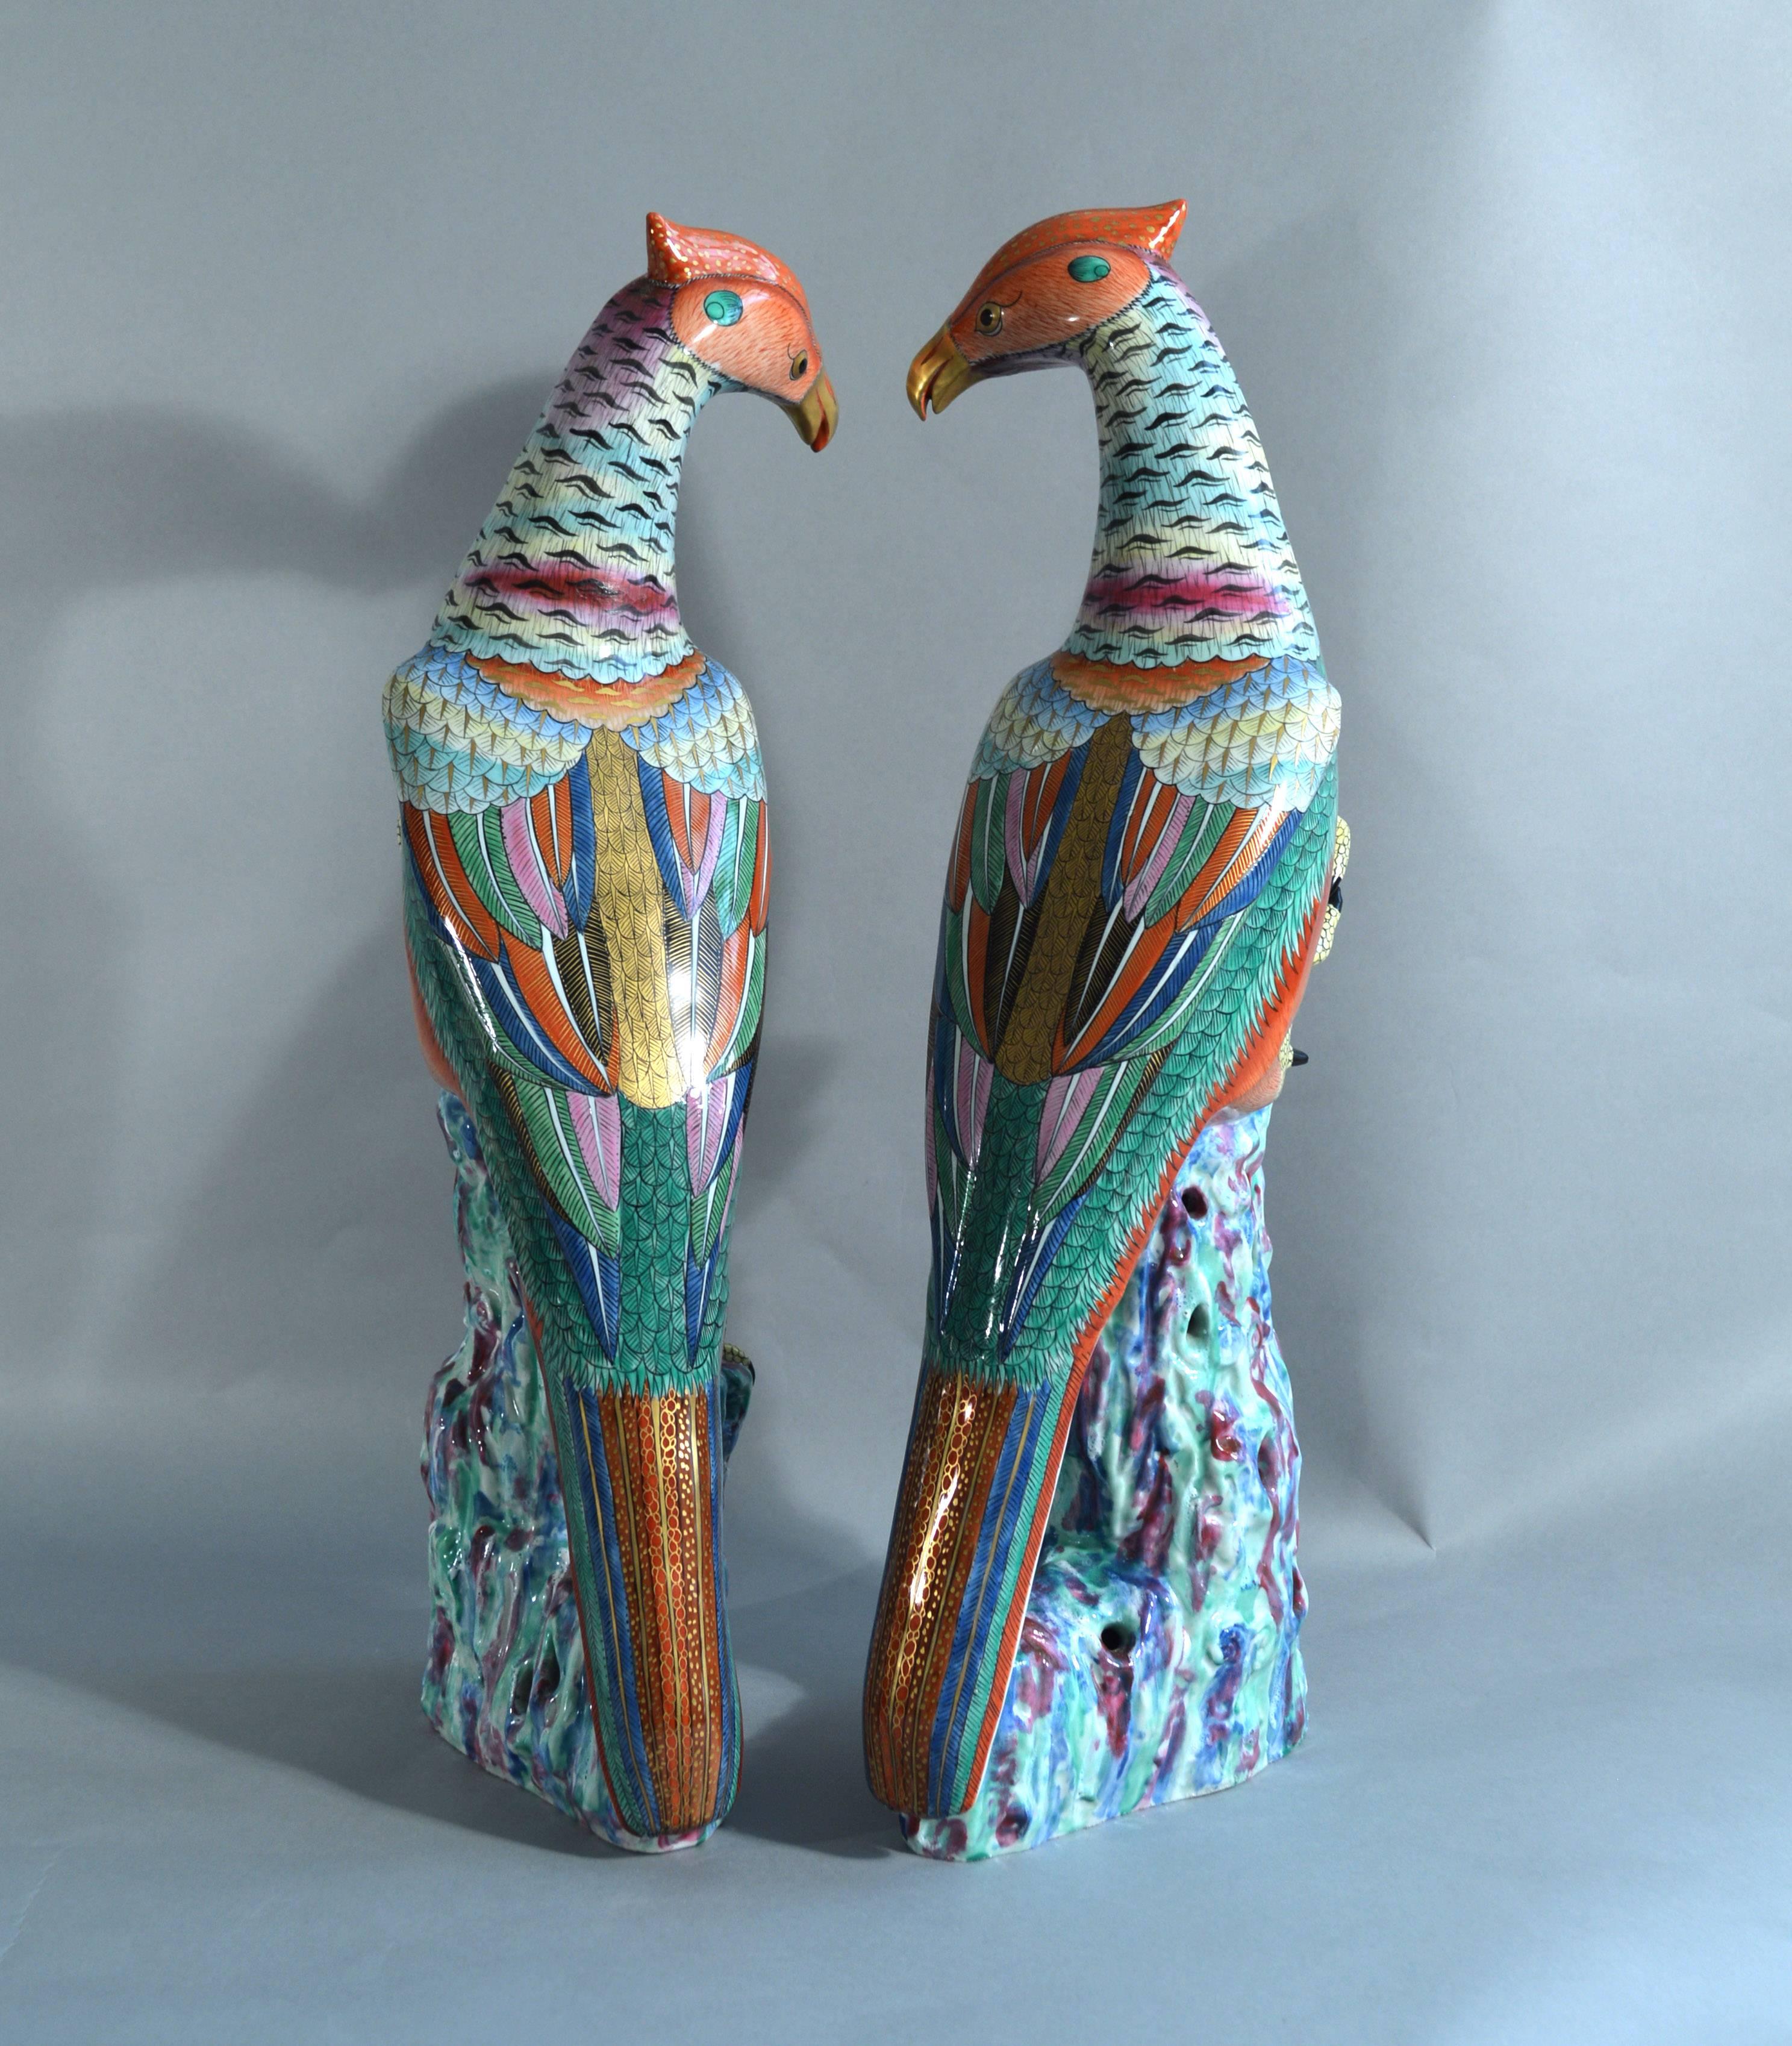 Pair of large Chinese export porcelain figures of Pheasants. 

The life-like large porcelain figures depict bright 